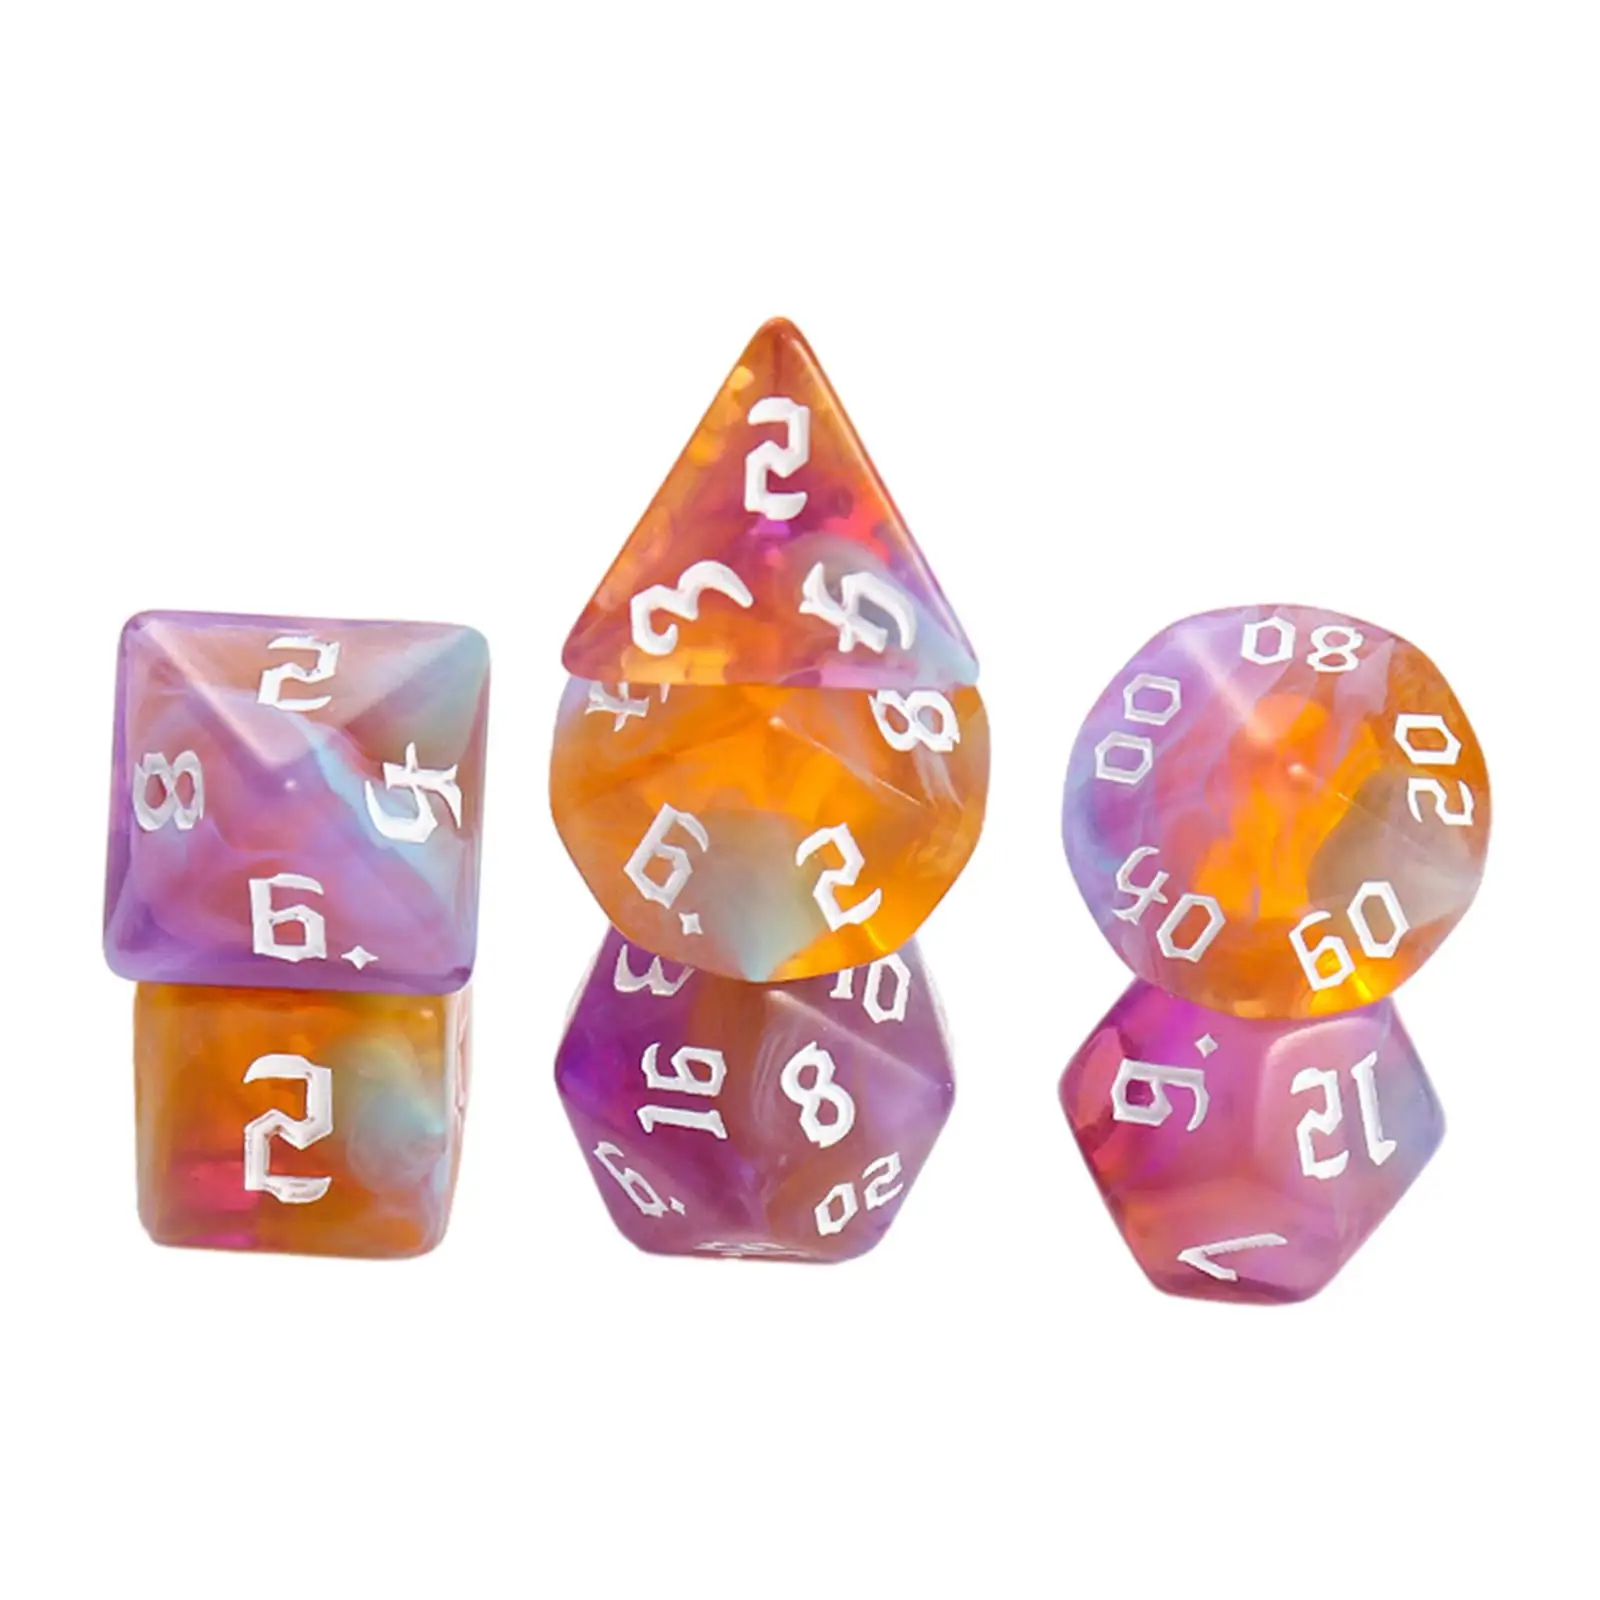 7 Pieces D4 D8 D10 D12 D20 Dices Bar Toys Board Game Acrylic Dices Polyhedral Dices Set for Card Games Math Teaching RPG